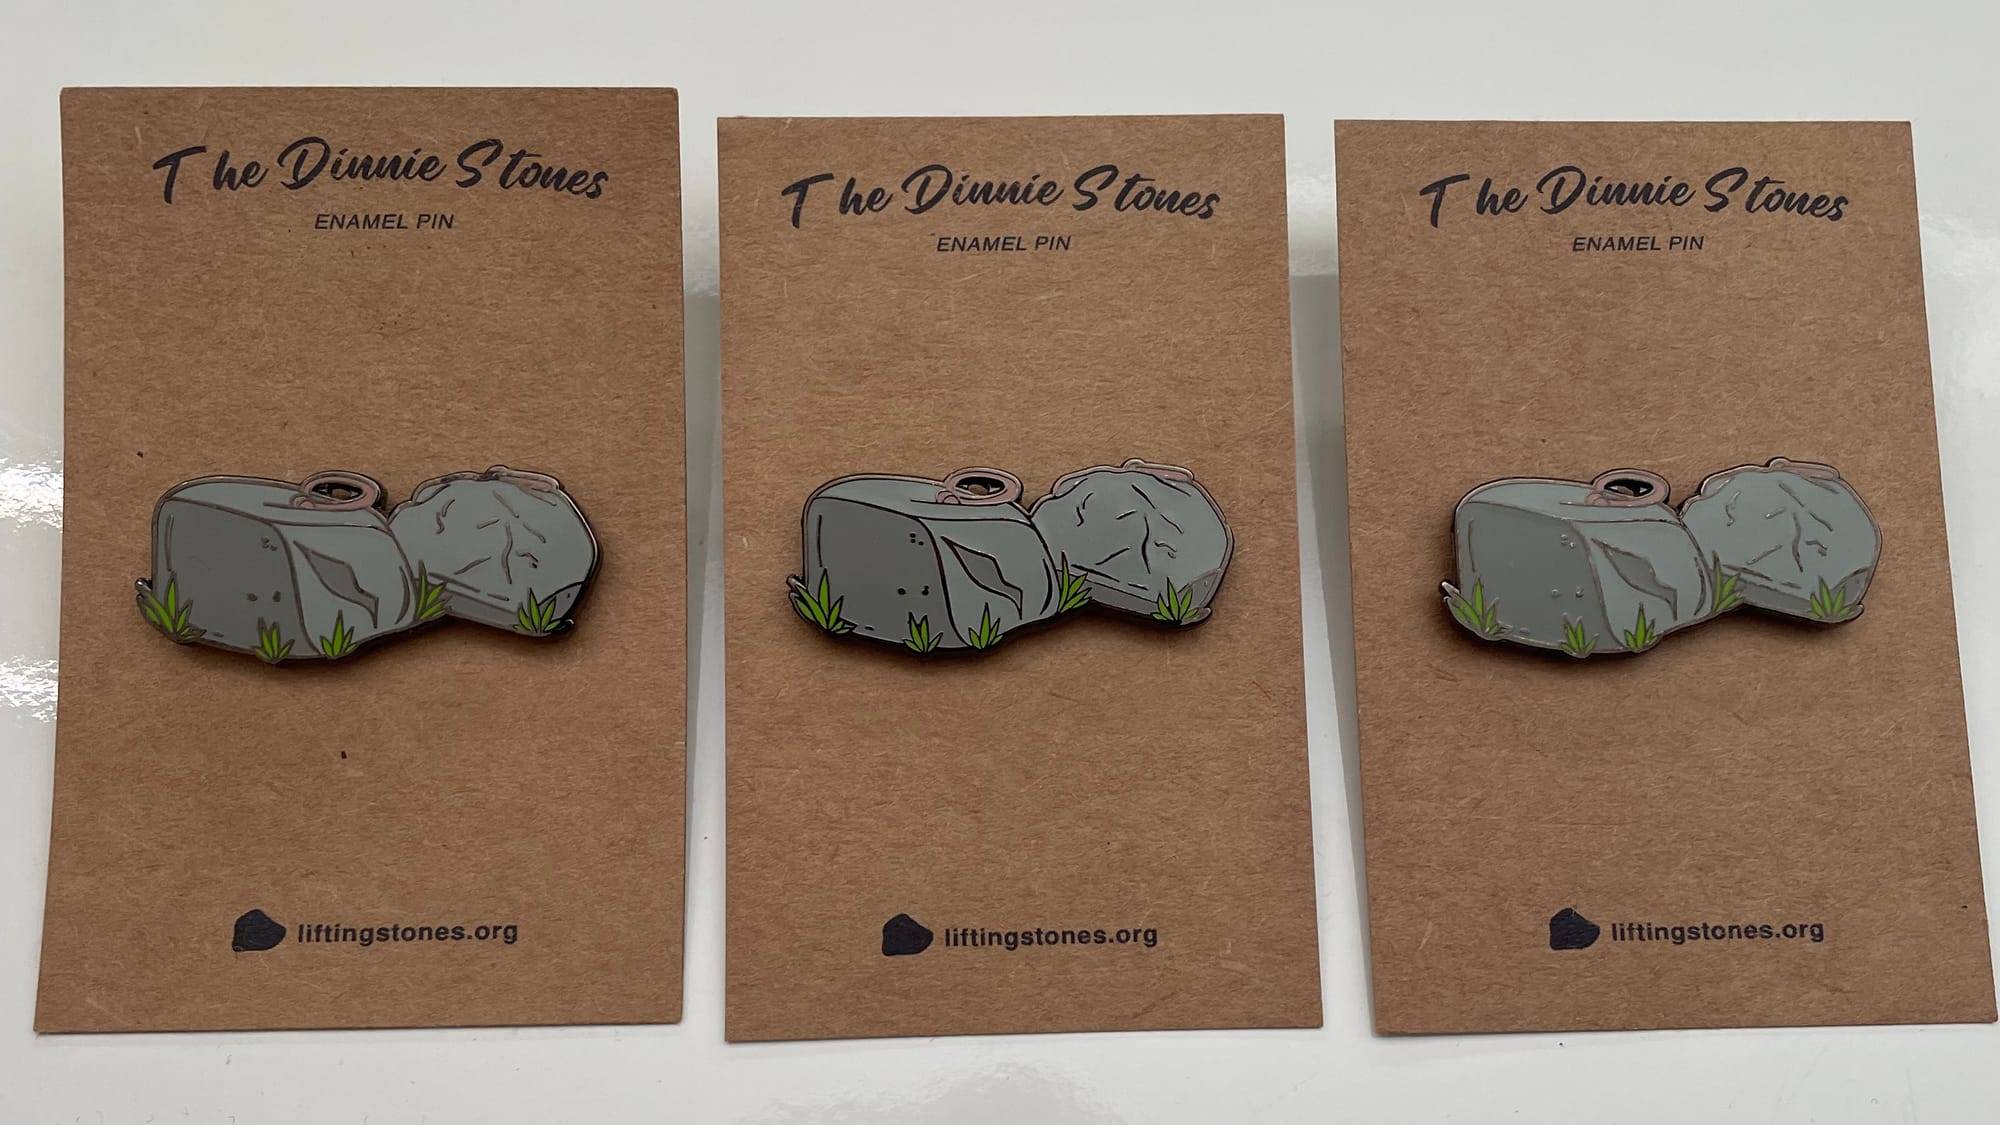 Three enamel pins attached to their backing cards on display.